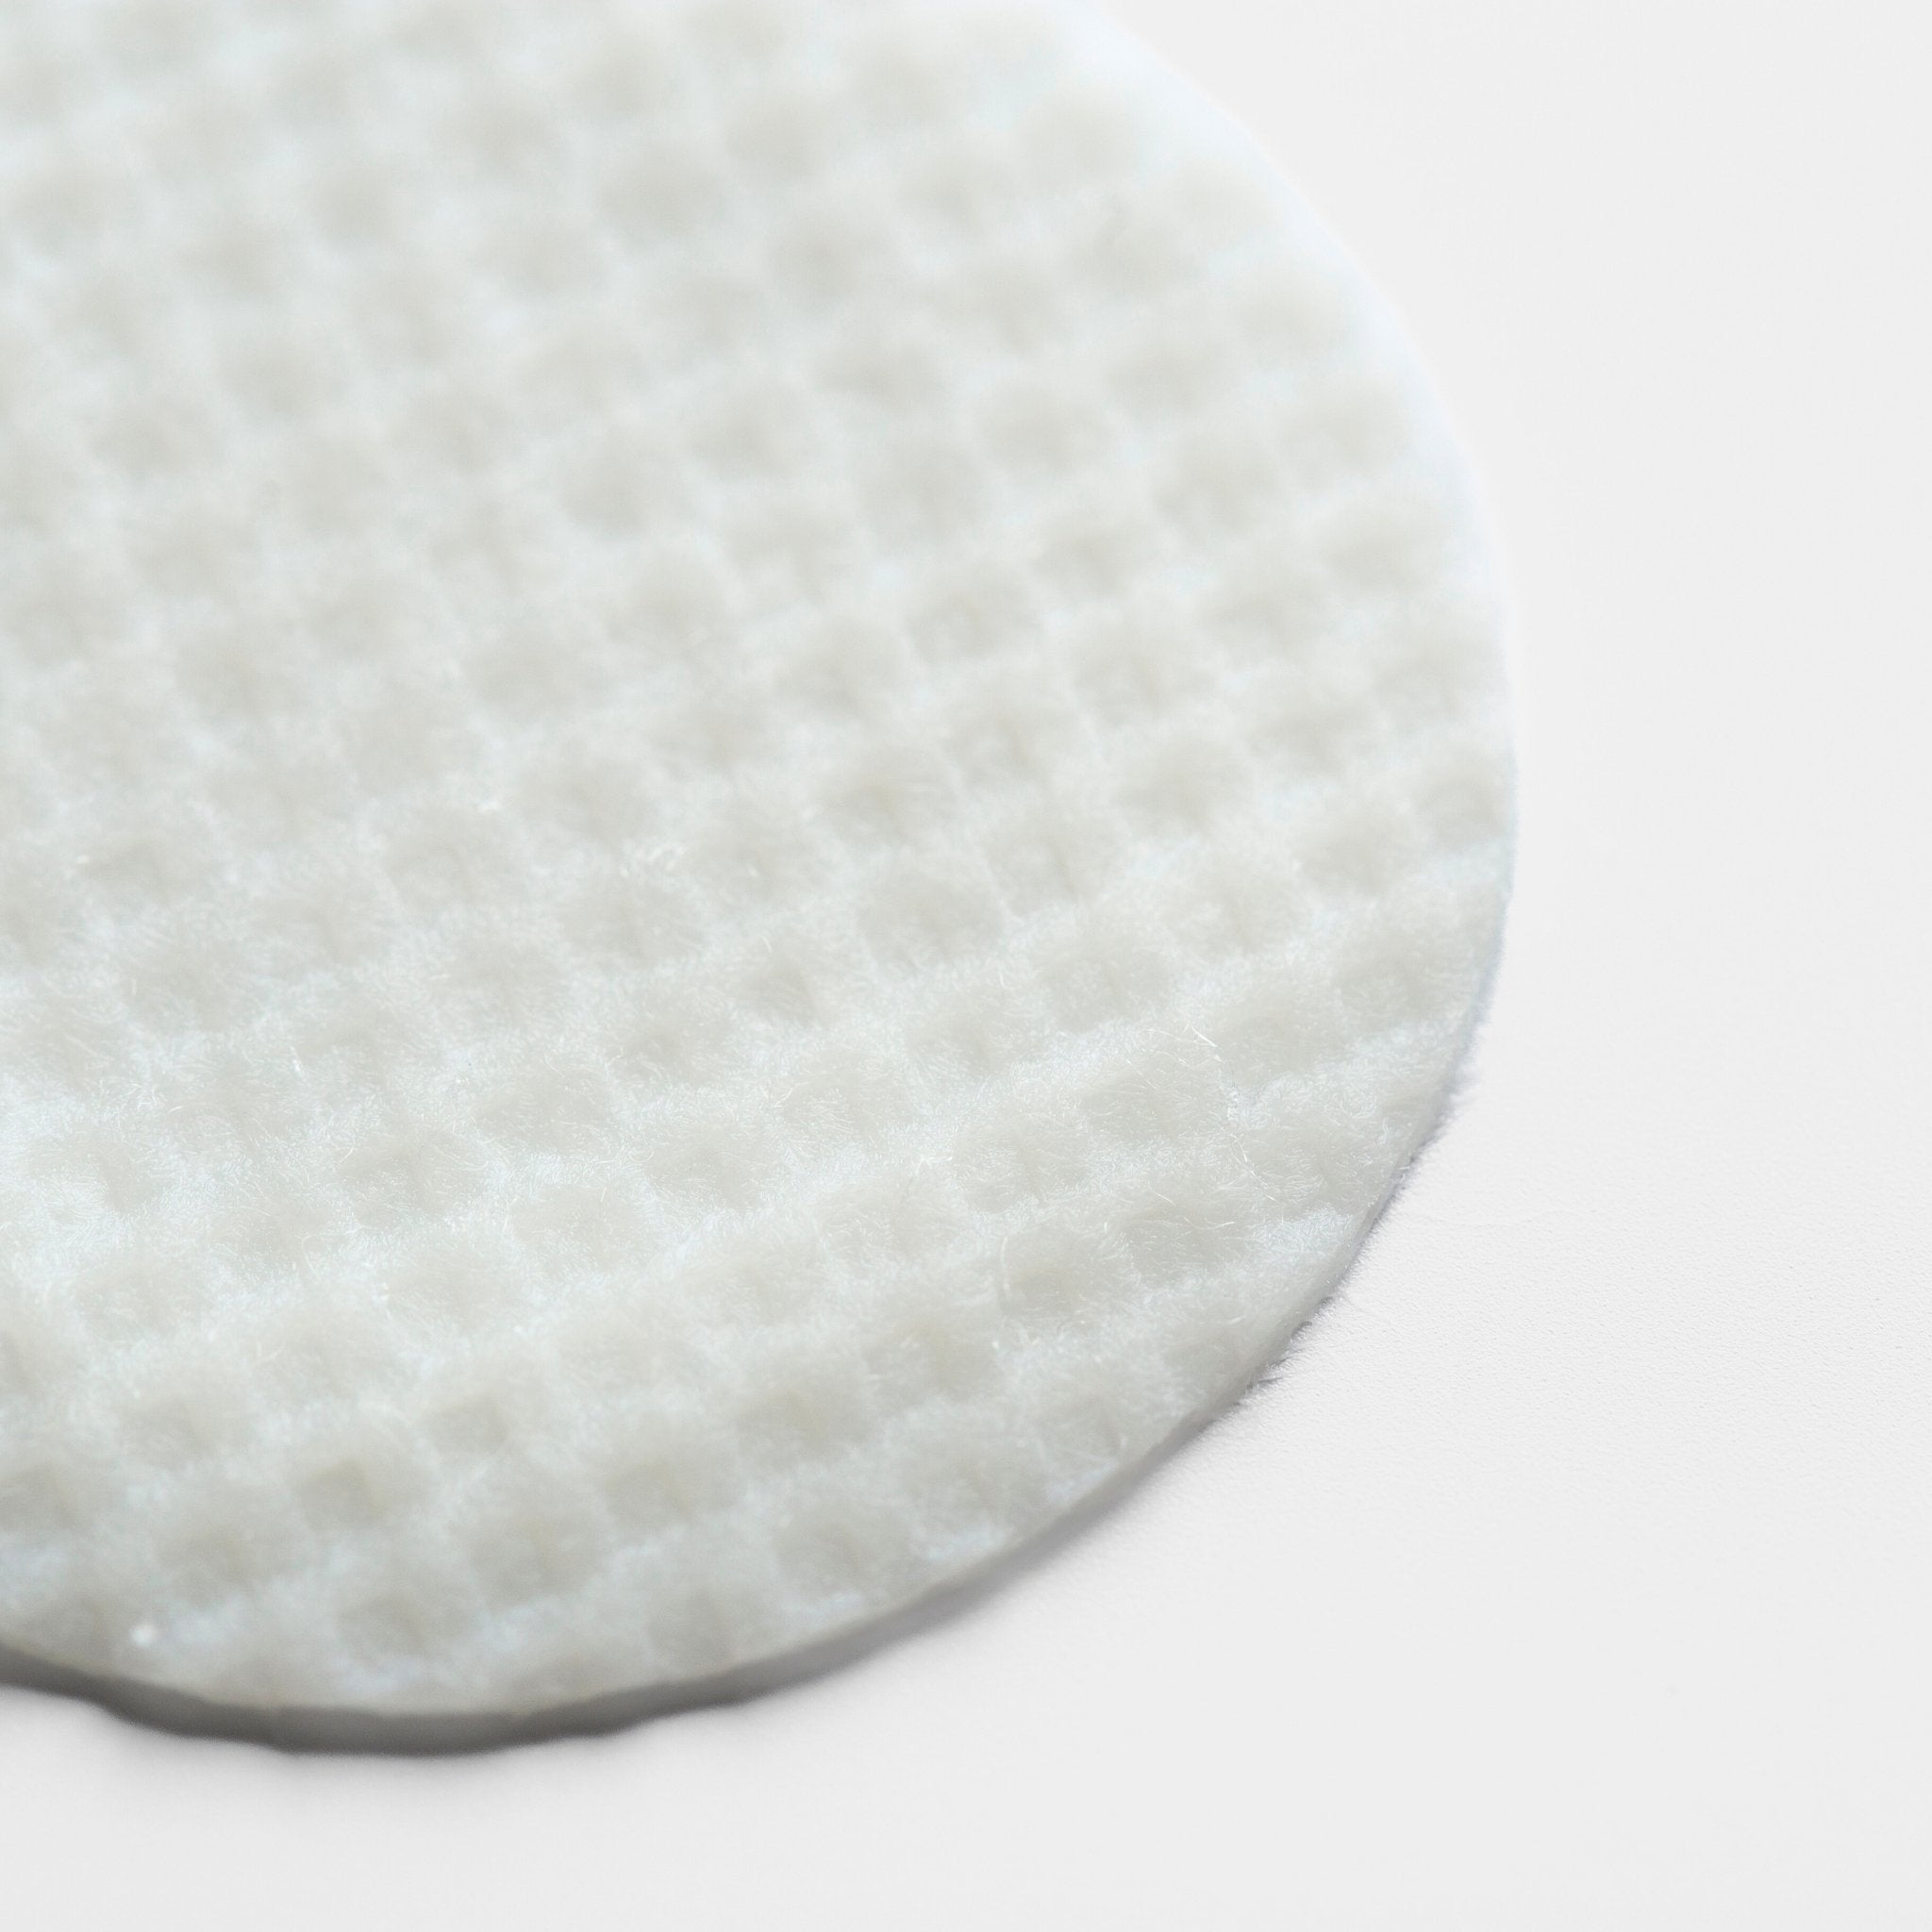 Dual-Action Exfoliating Peptide Pads with AHA + BHA - Atmosphera